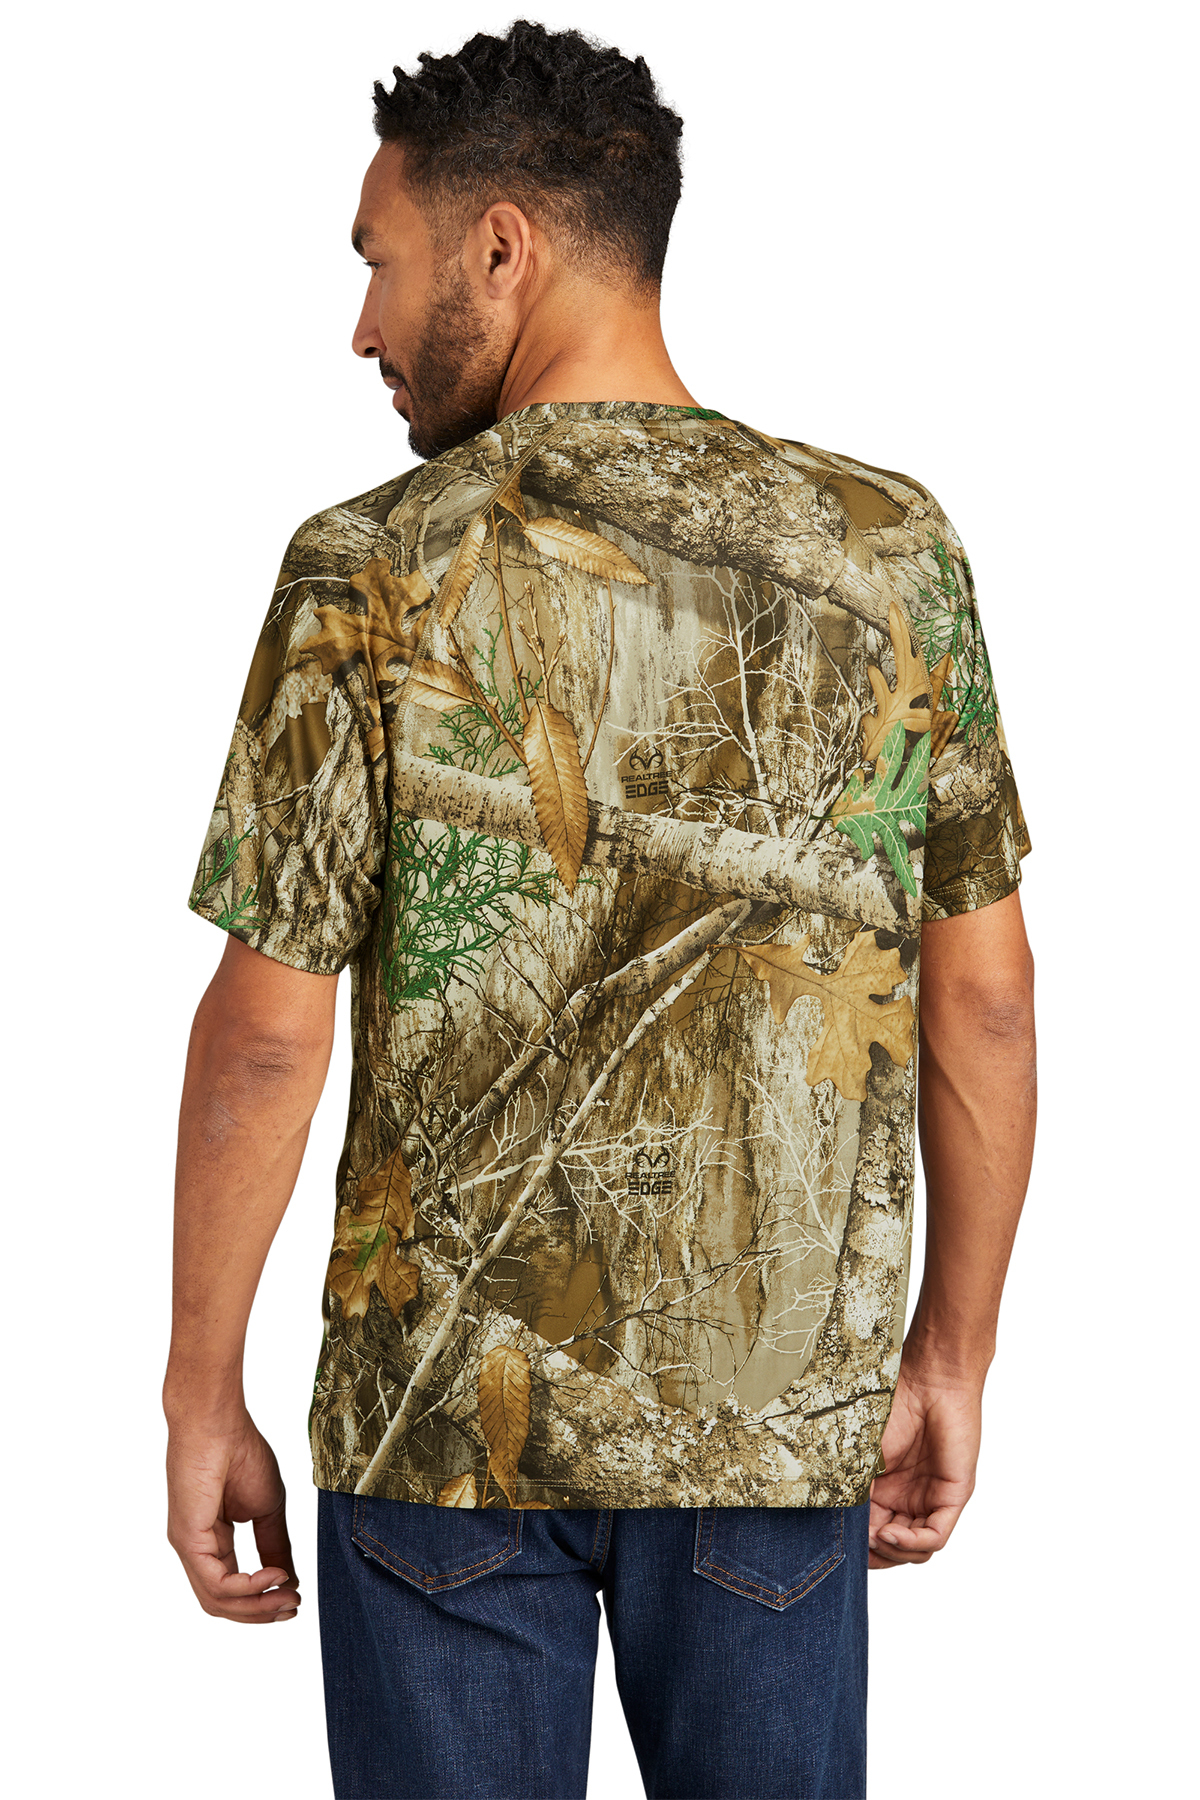 Russell Outdoors Realtree Performance Tee | Product | SanMar